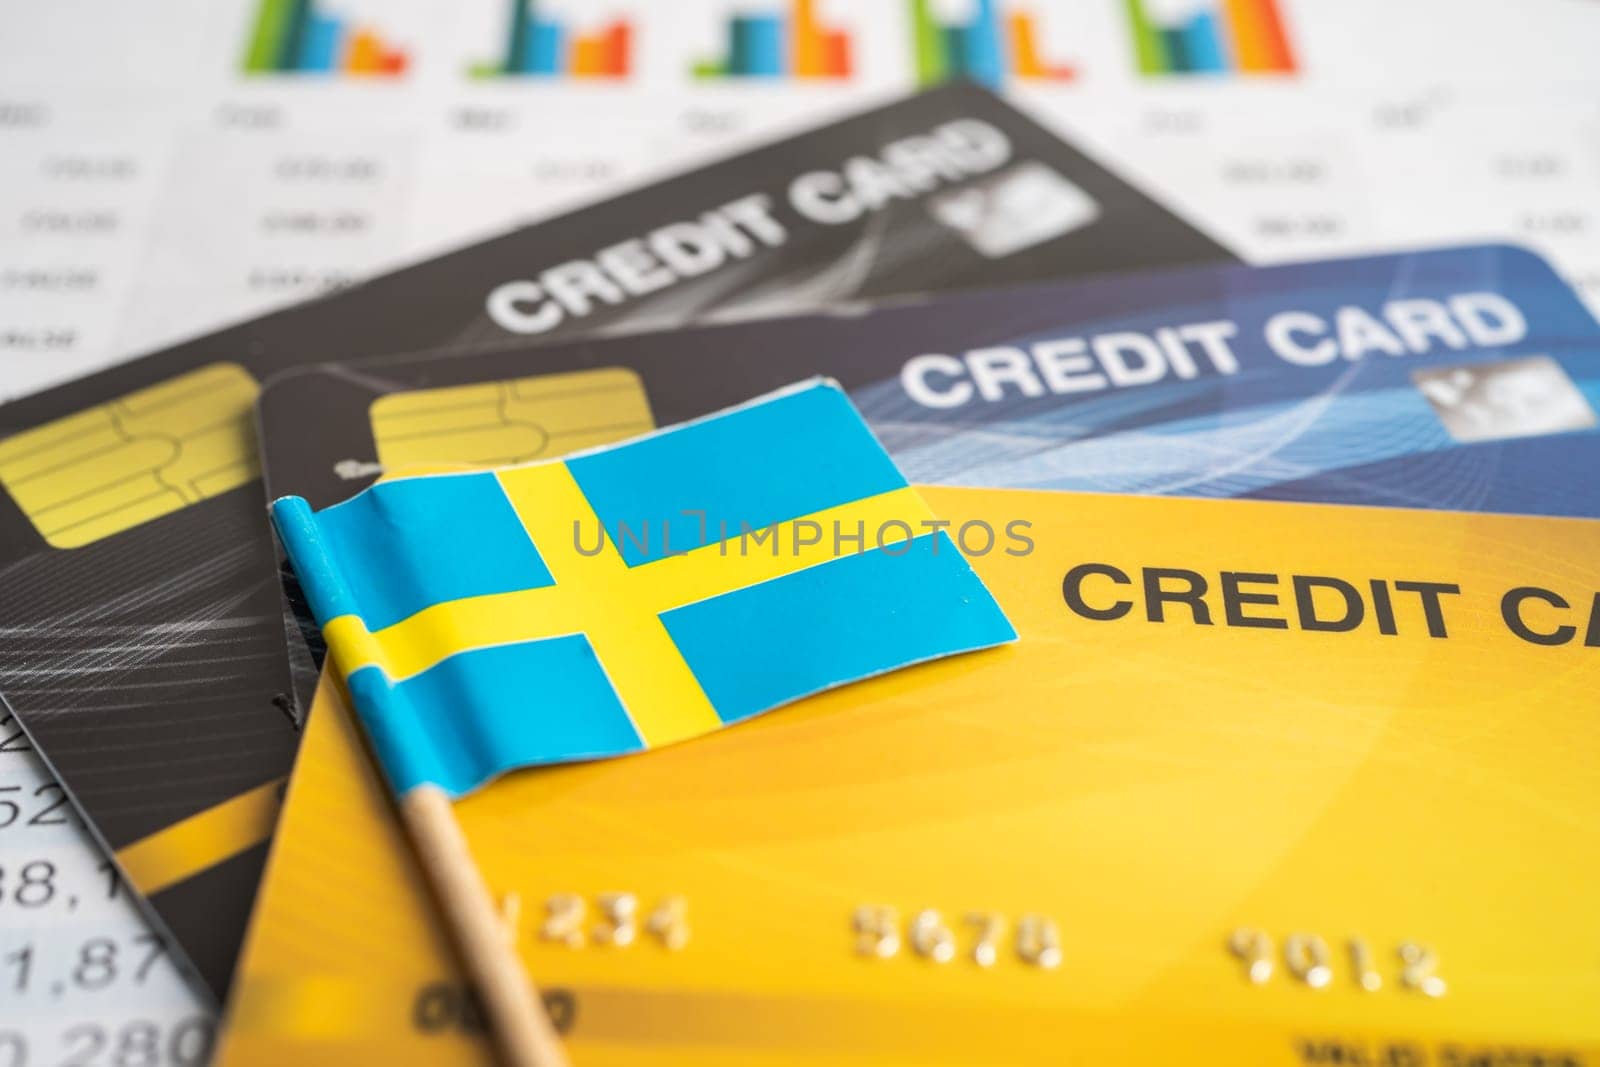 Credit card model with Sweden flag, financial investment economy business banking concept.